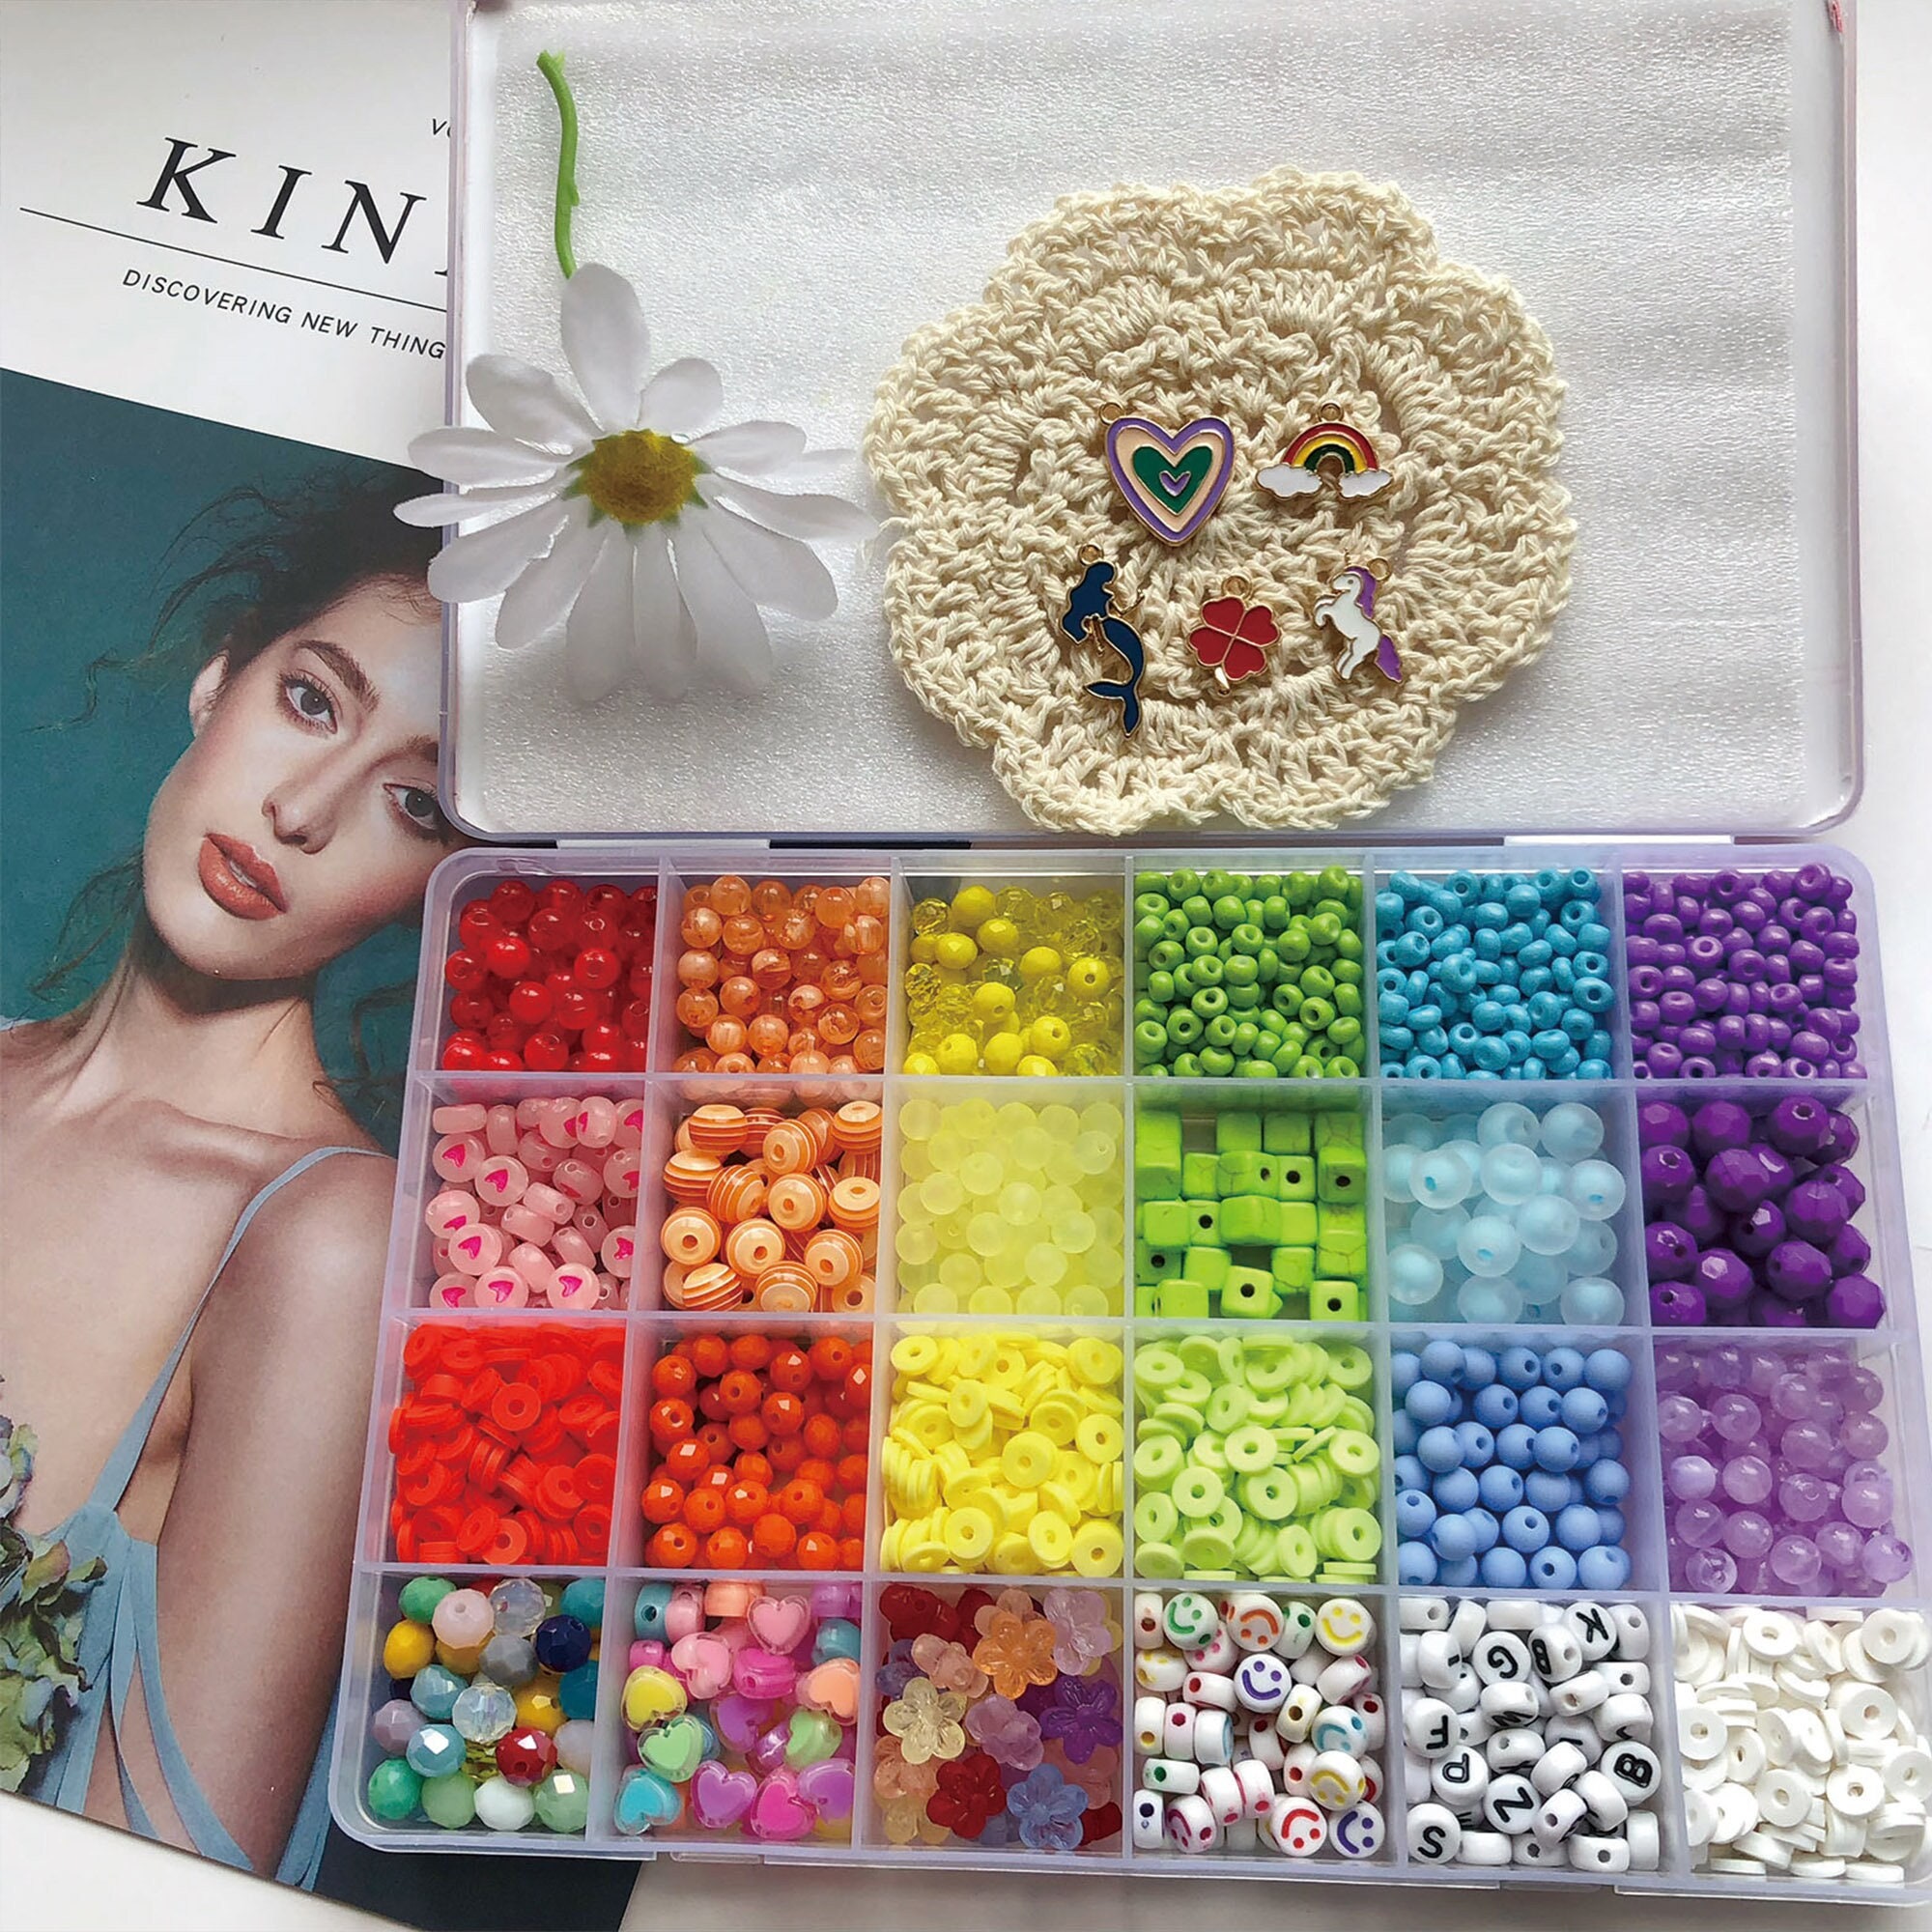 15 Colors Glass Seed Bead Kit, Size 6/0, 4mm, About 4,500pcs/box, Mixed  Color for DIY Jewelry, Kid's Crafts, Beaded Projects, Variety Pack 